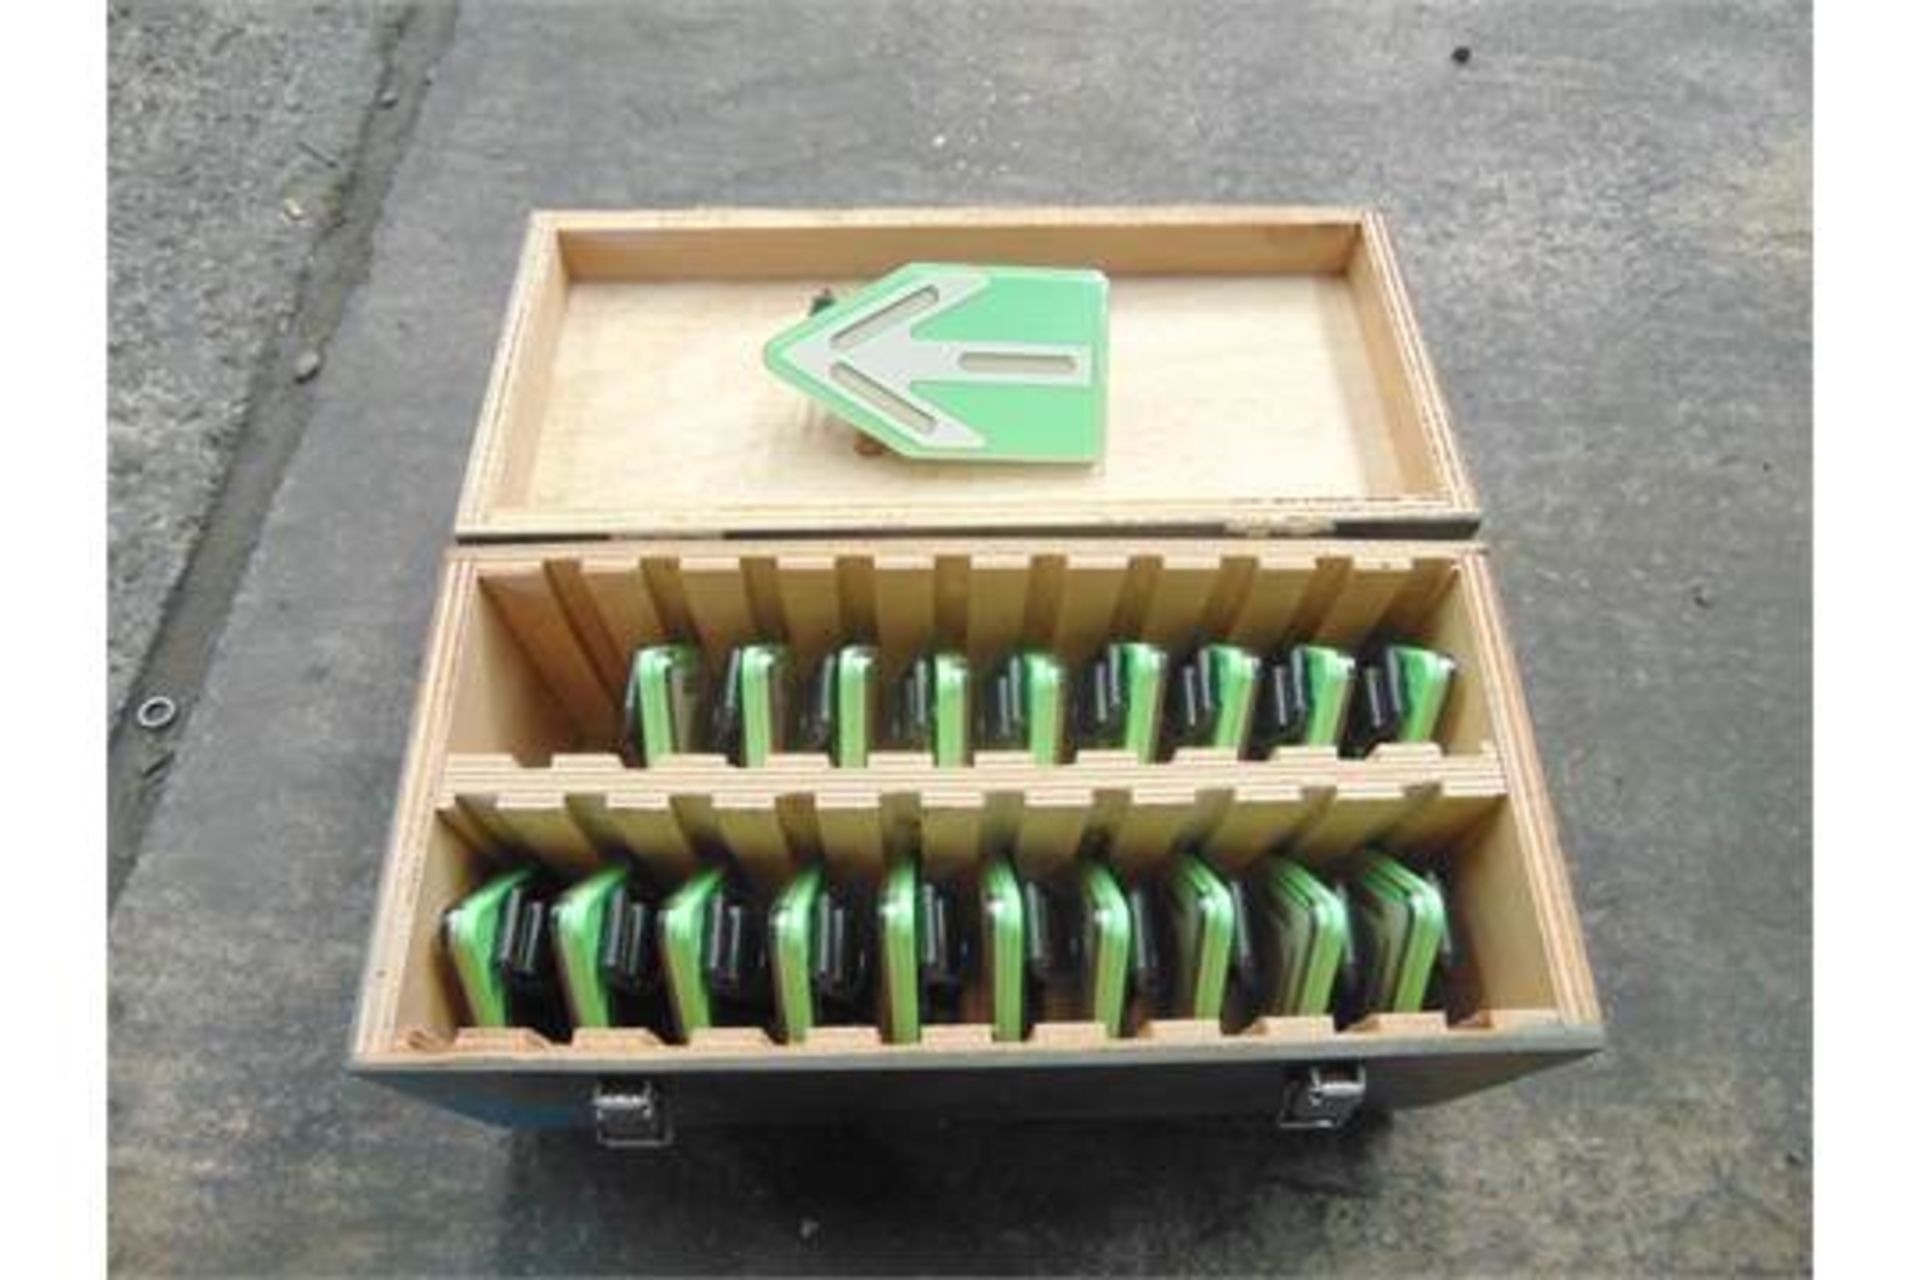 20 x Very Rare British Army Glow In The Dark Green Route Markers in Wooden Transit Case